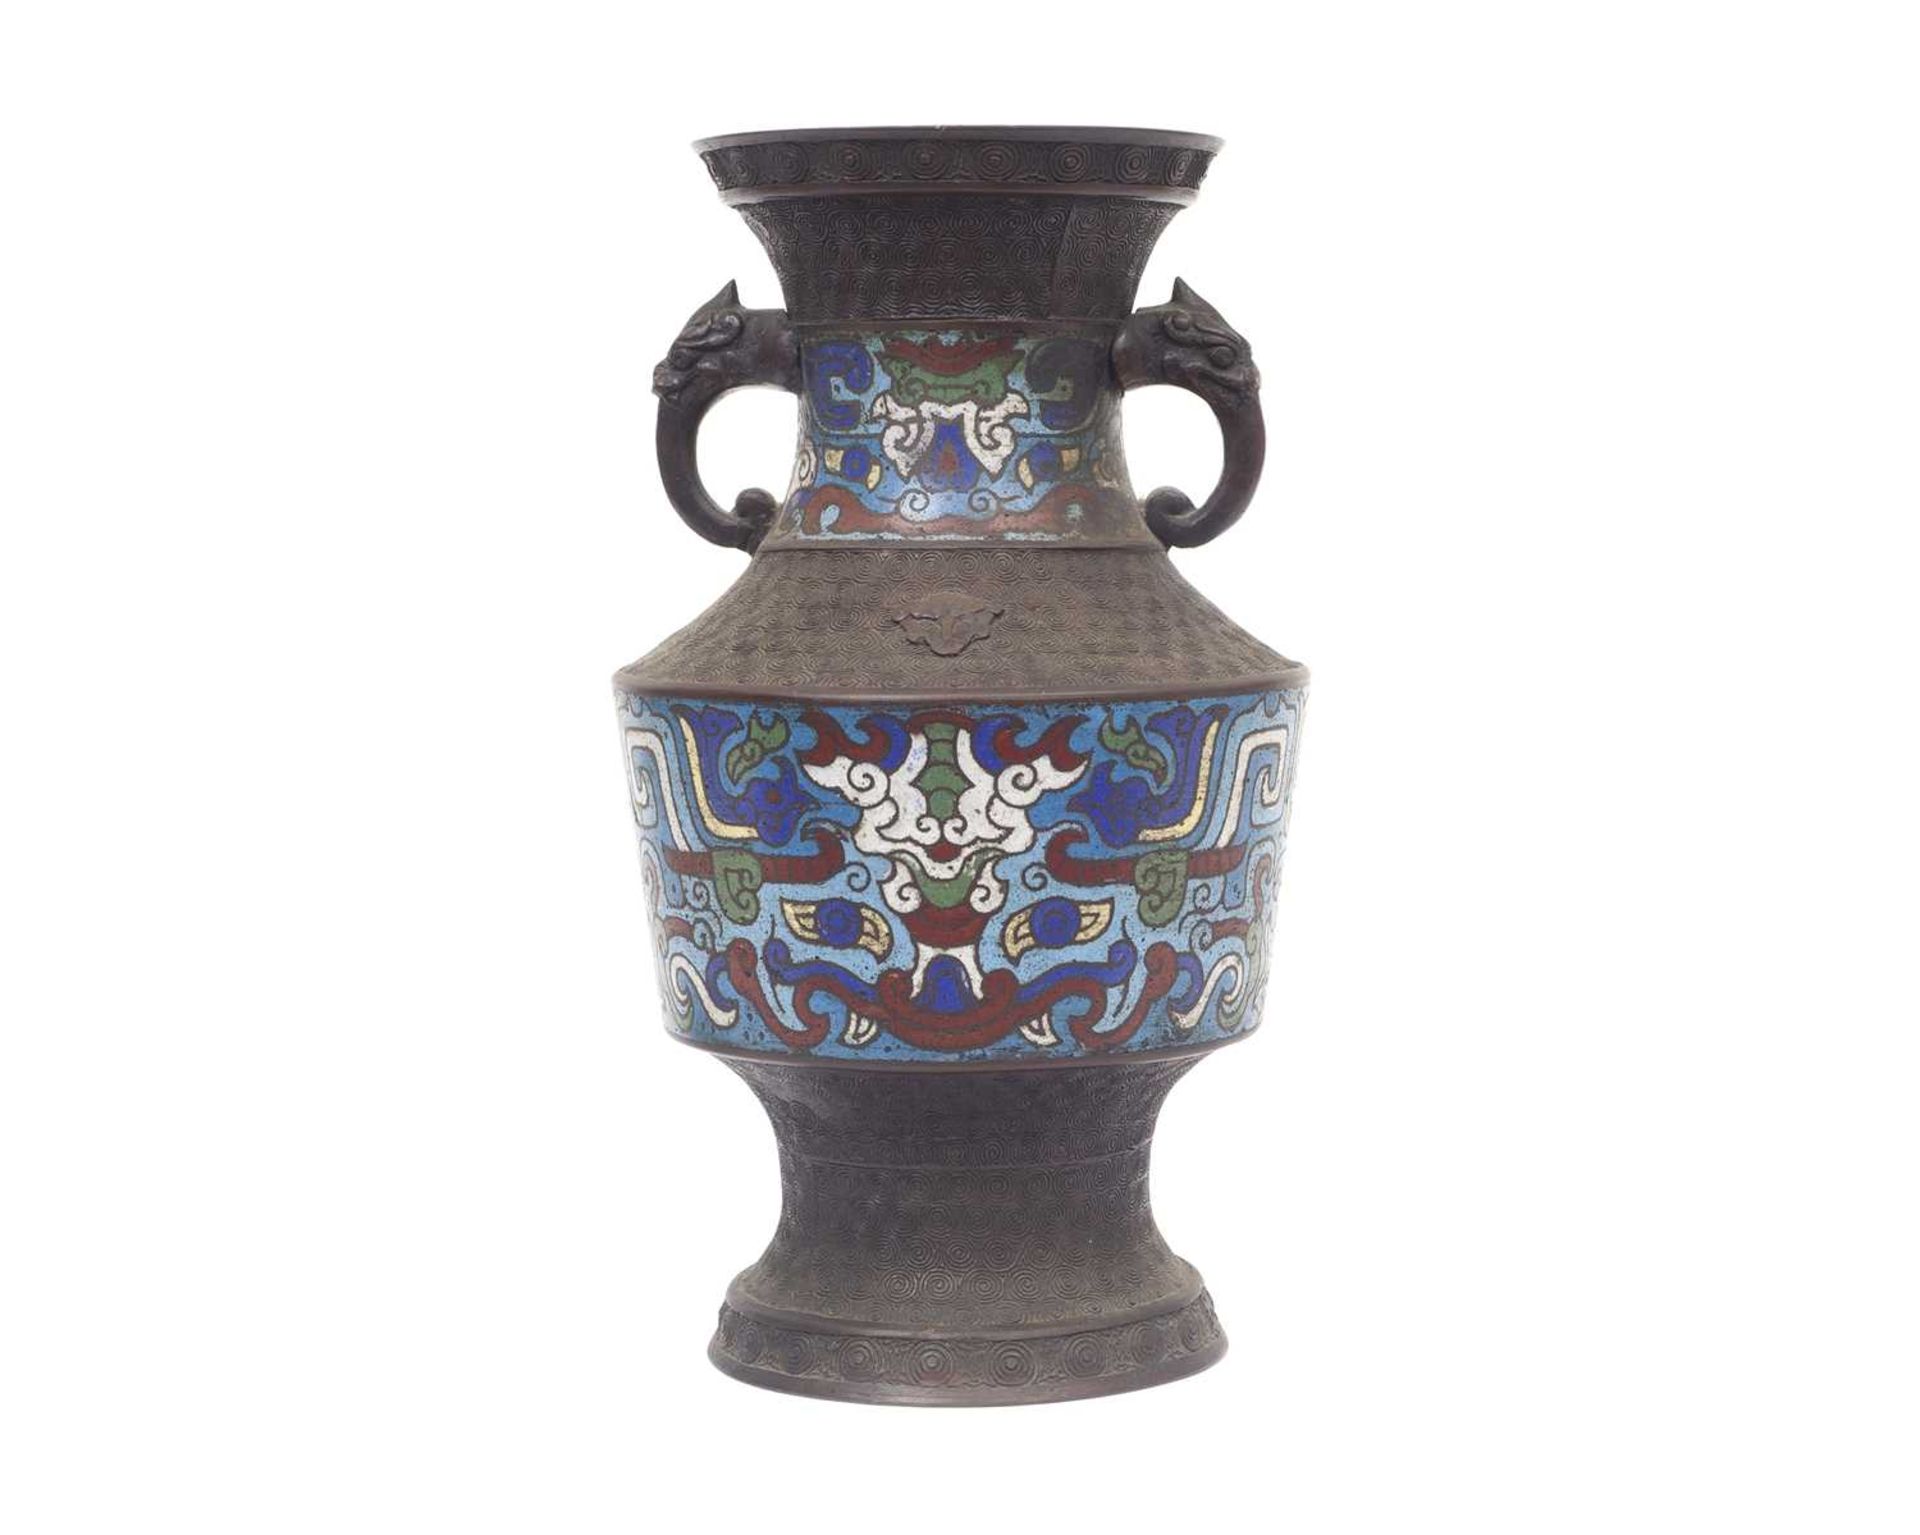 A CHINESE ARCHAIC STYLE BRONZE AND CLOISONNE ENAMEL VASE - Image 2 of 4